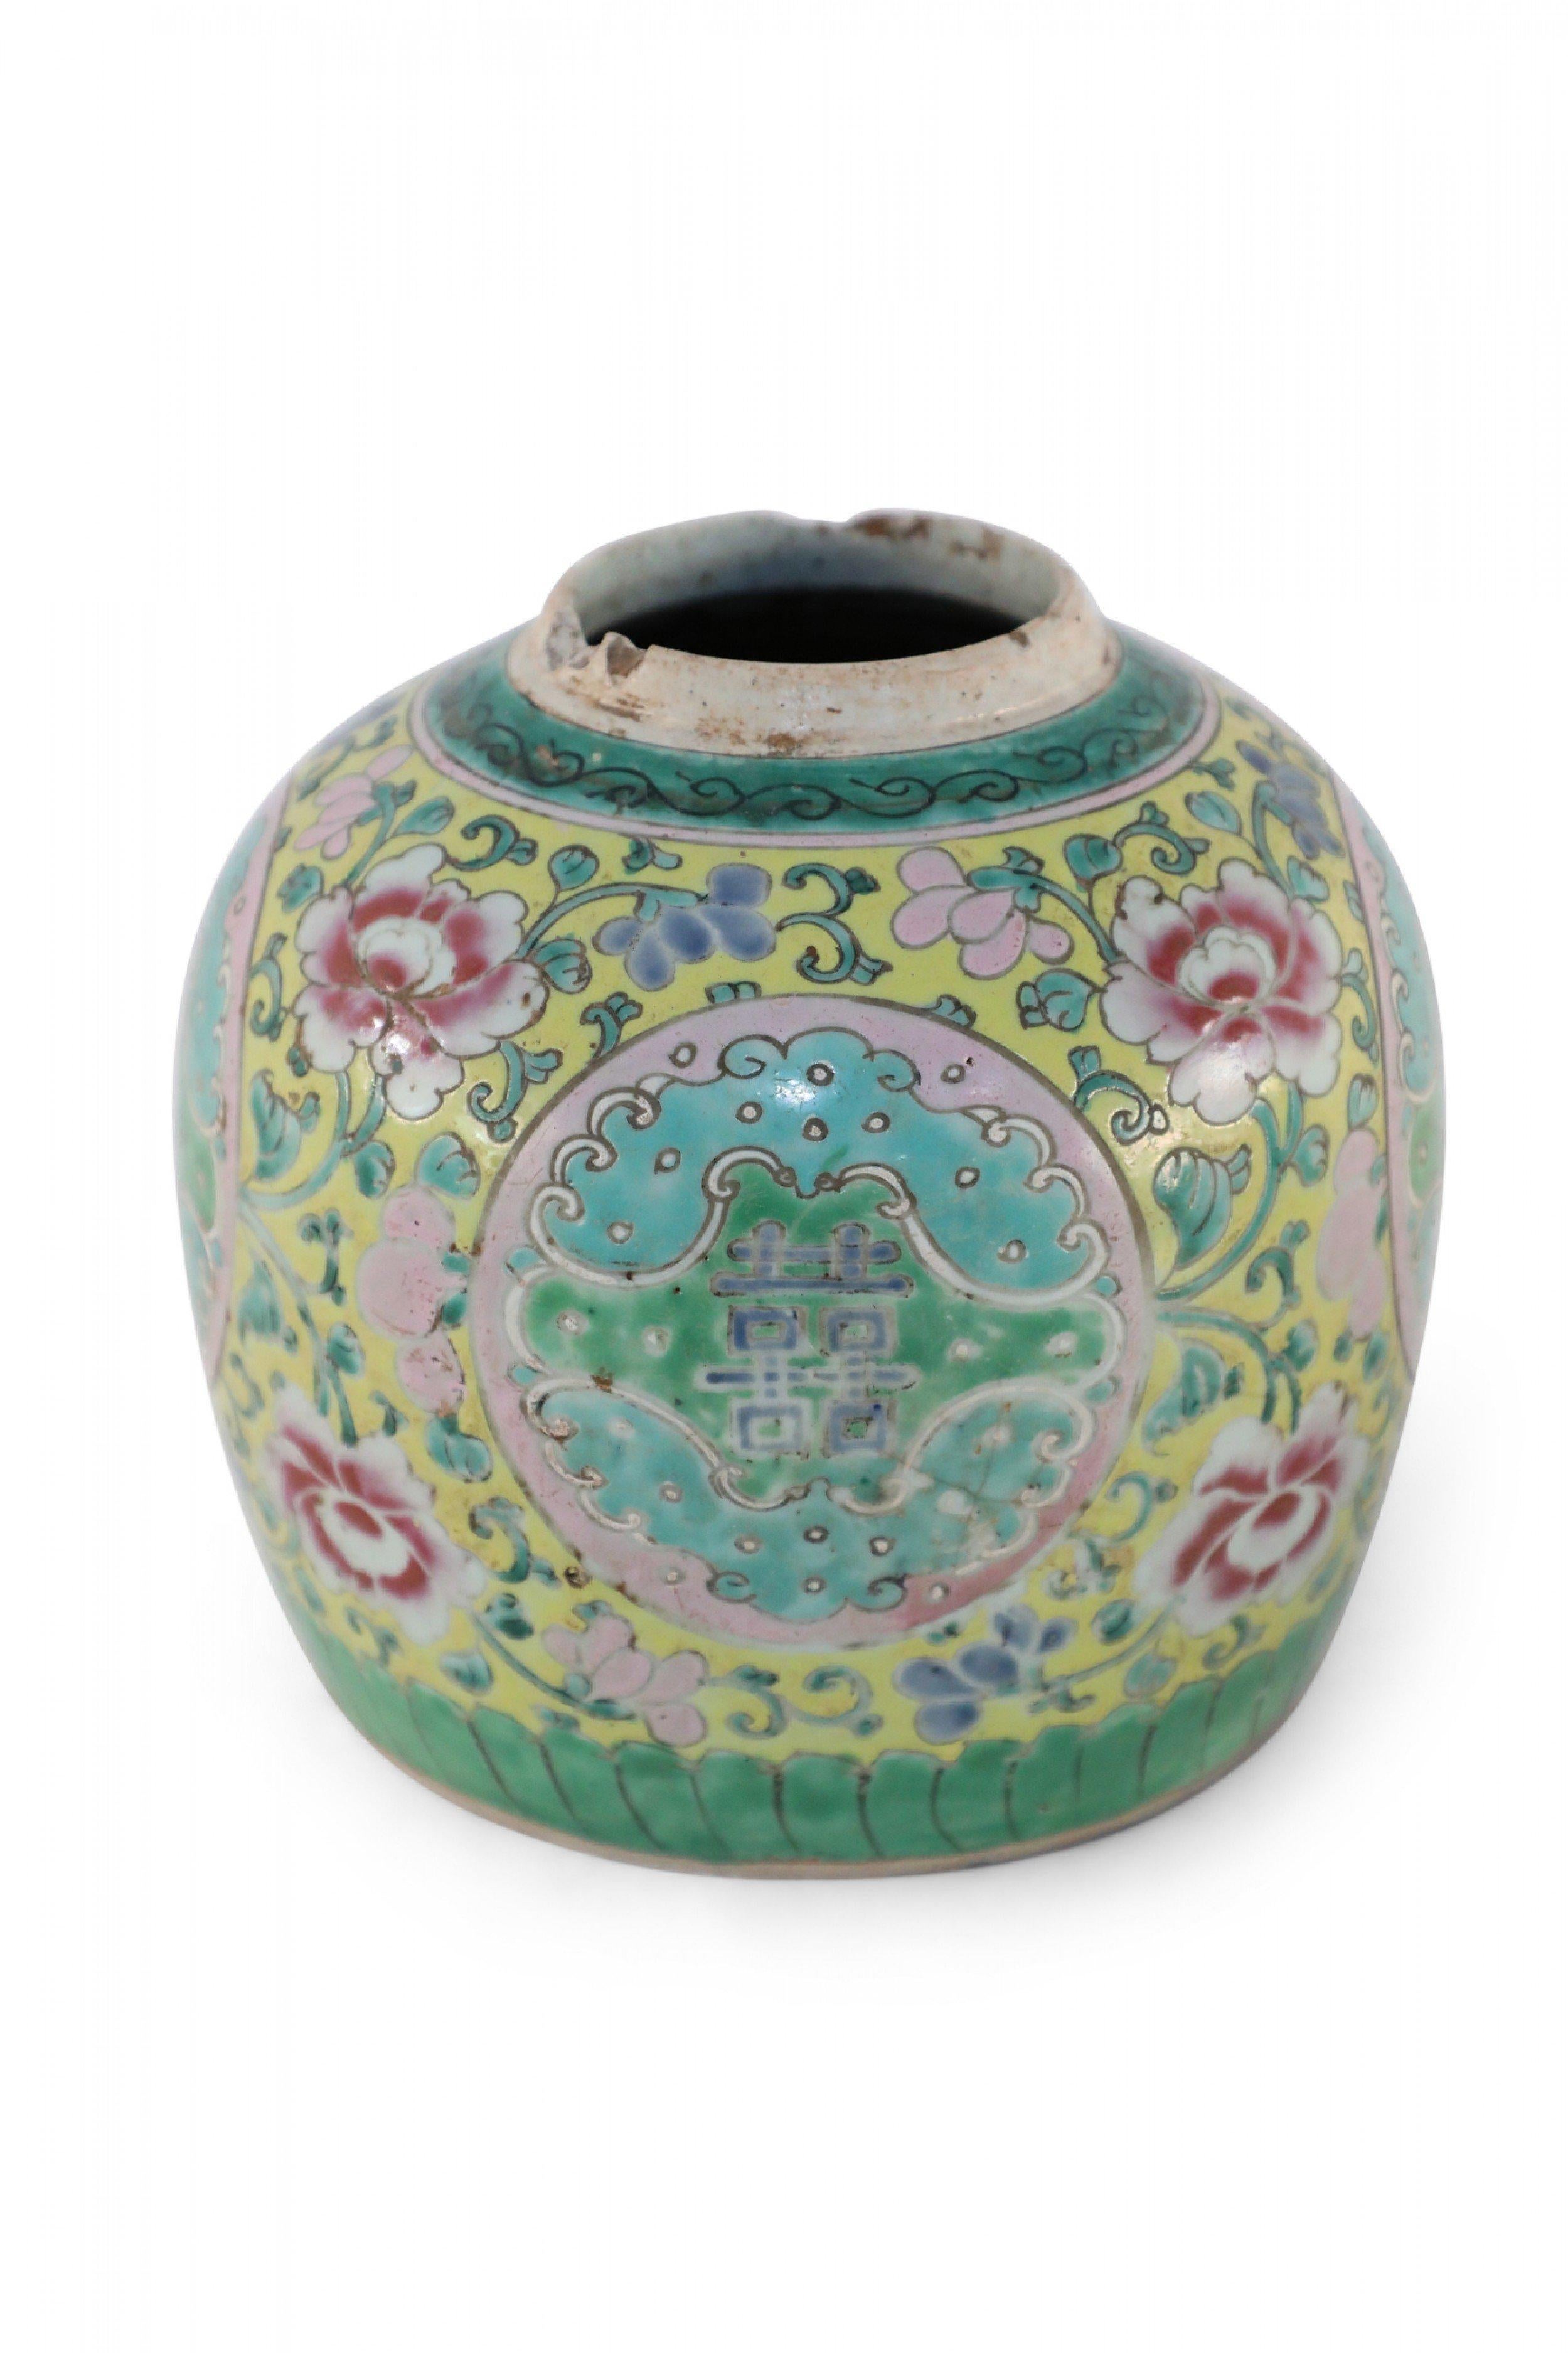 Antique Chinese (Early 20th Century) low, rounded porcelain vase, known as a watermelon jar, incised and painted with green vines holding pink flowers on a yellow background, surrounding central pink and blue medallions with characters, and green